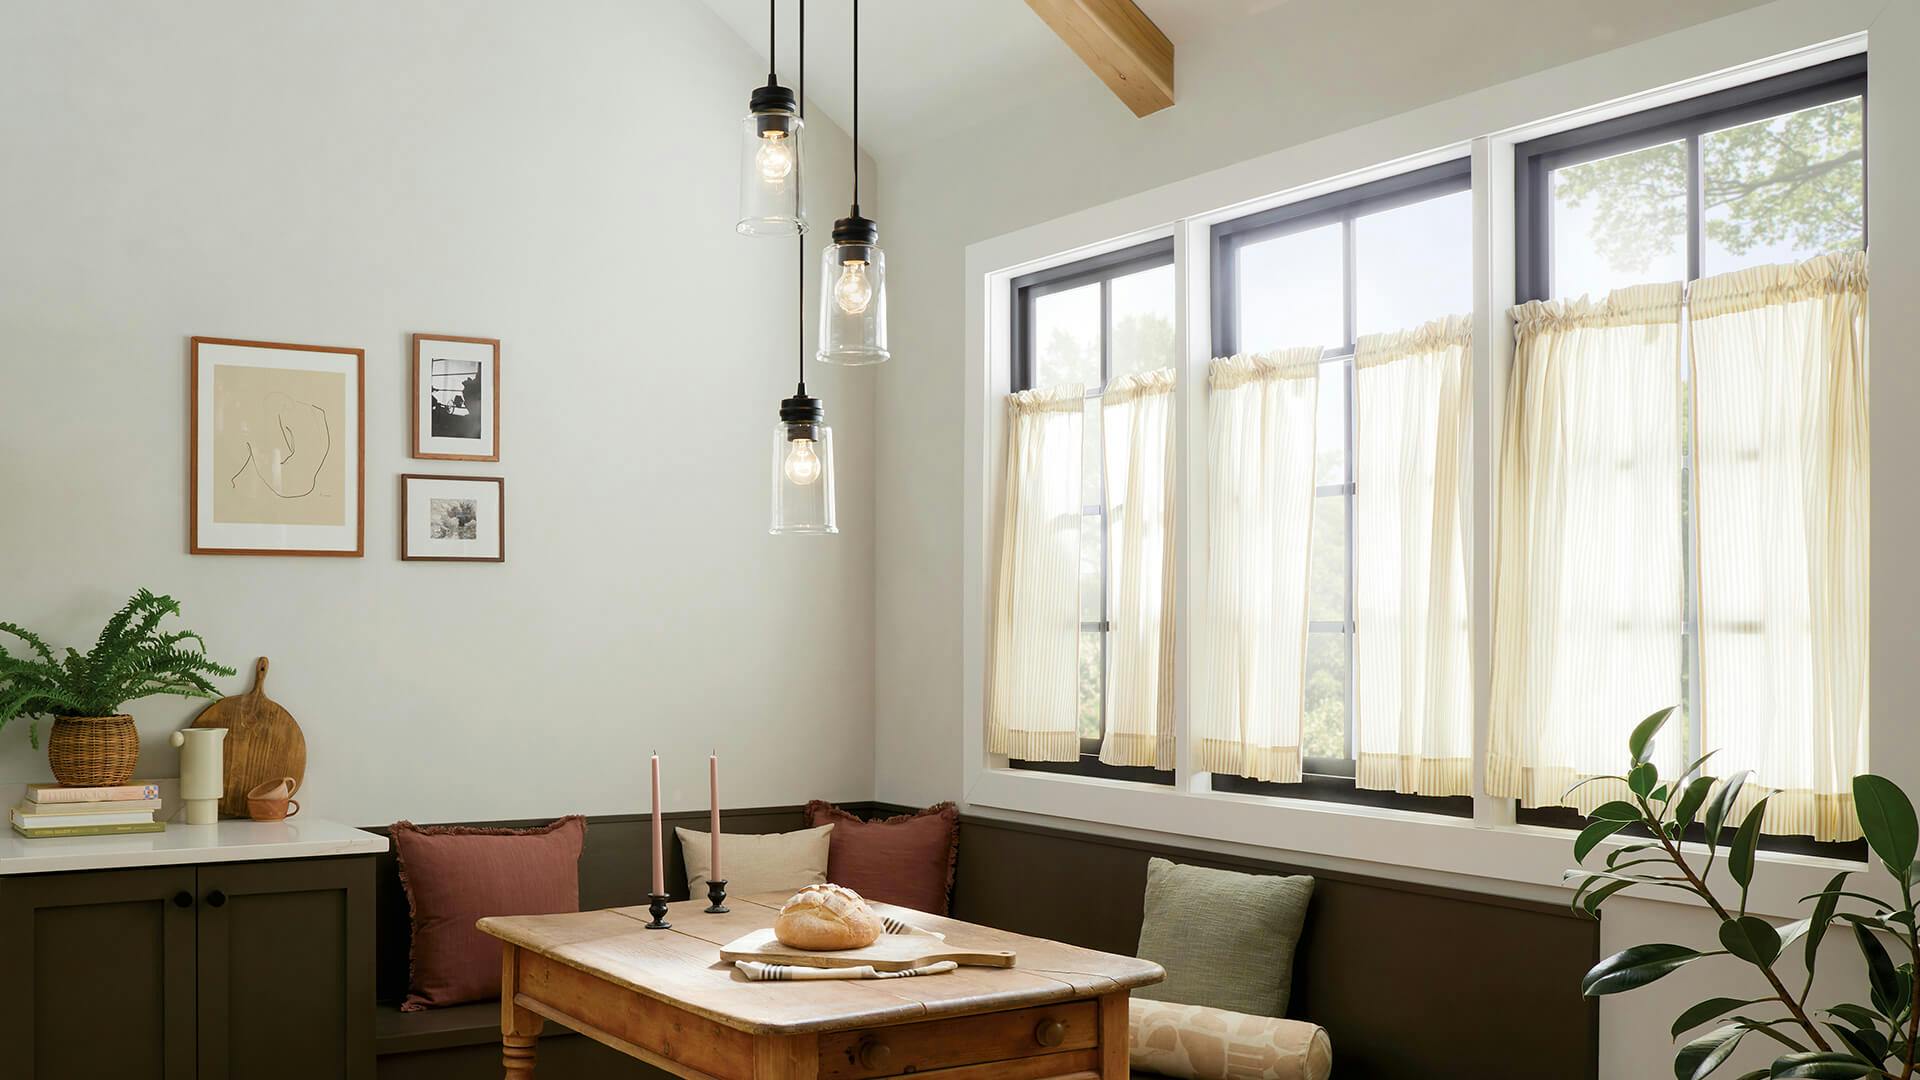 Corner dining nook with three windows pouring in morning light, featuring Jaylen pendant lights in black finish